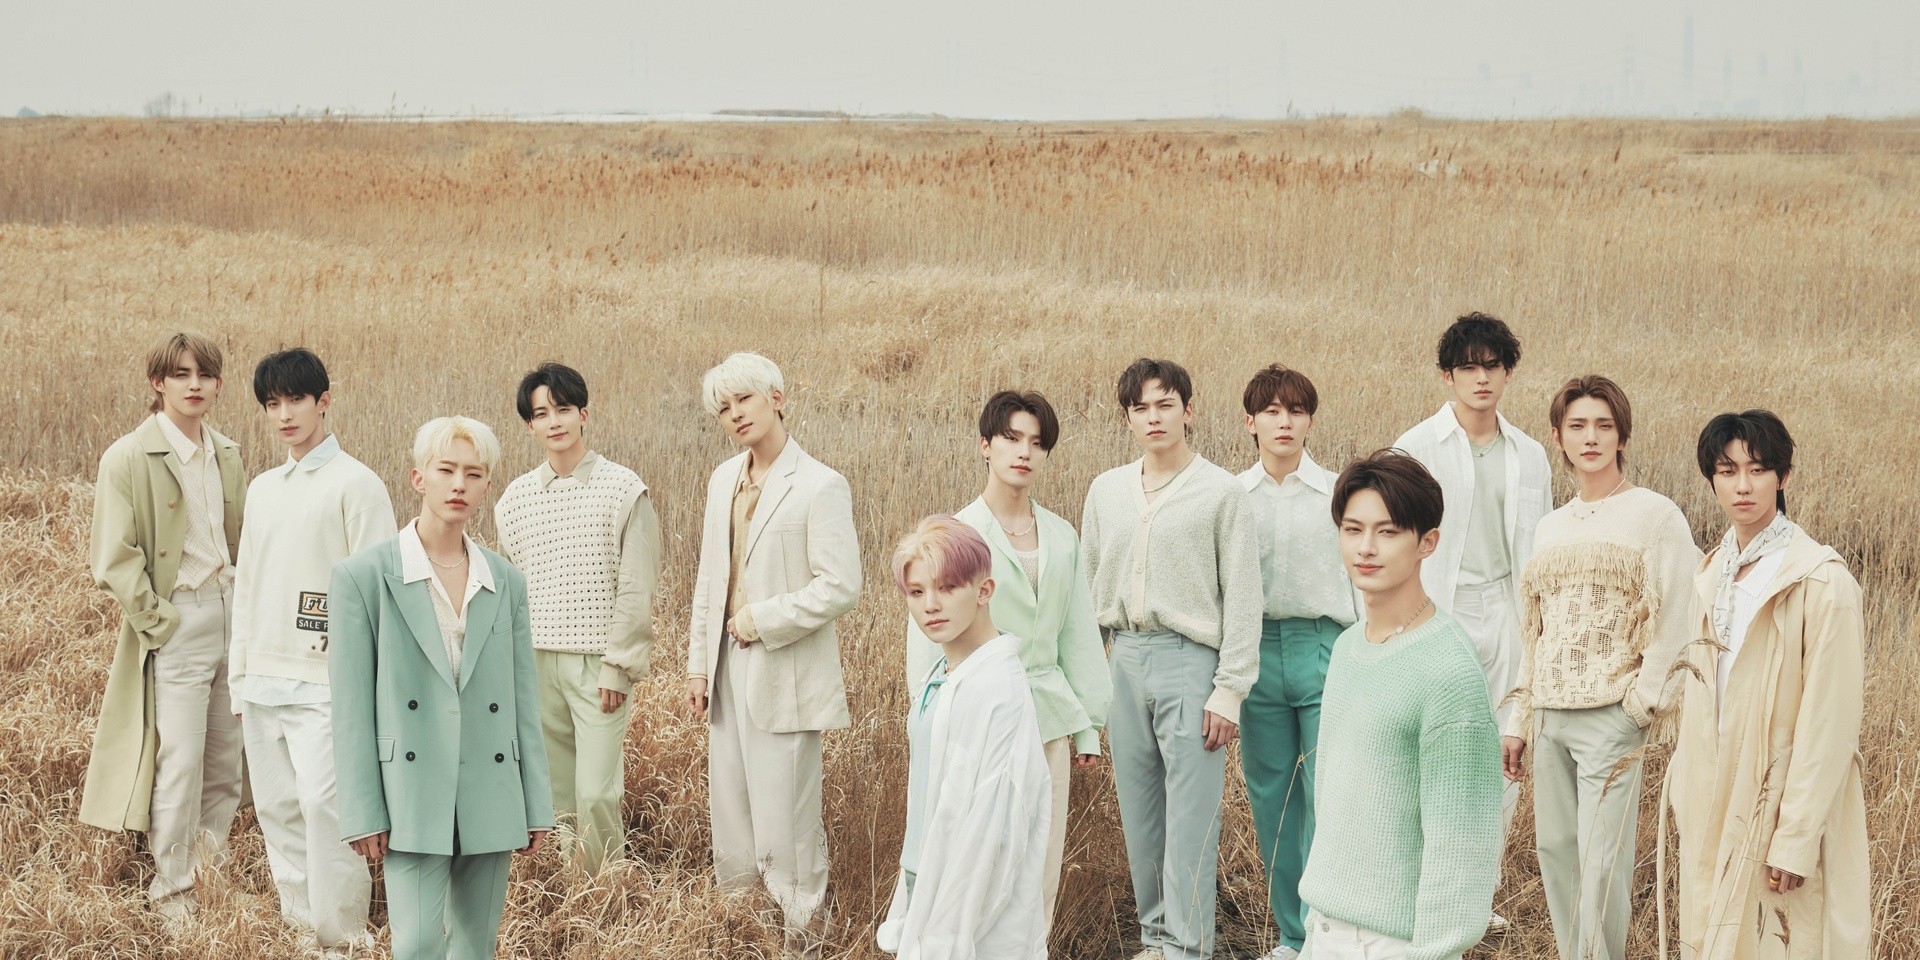 SEVENTEEN are returning with their new album 'Face The Sun' this May 